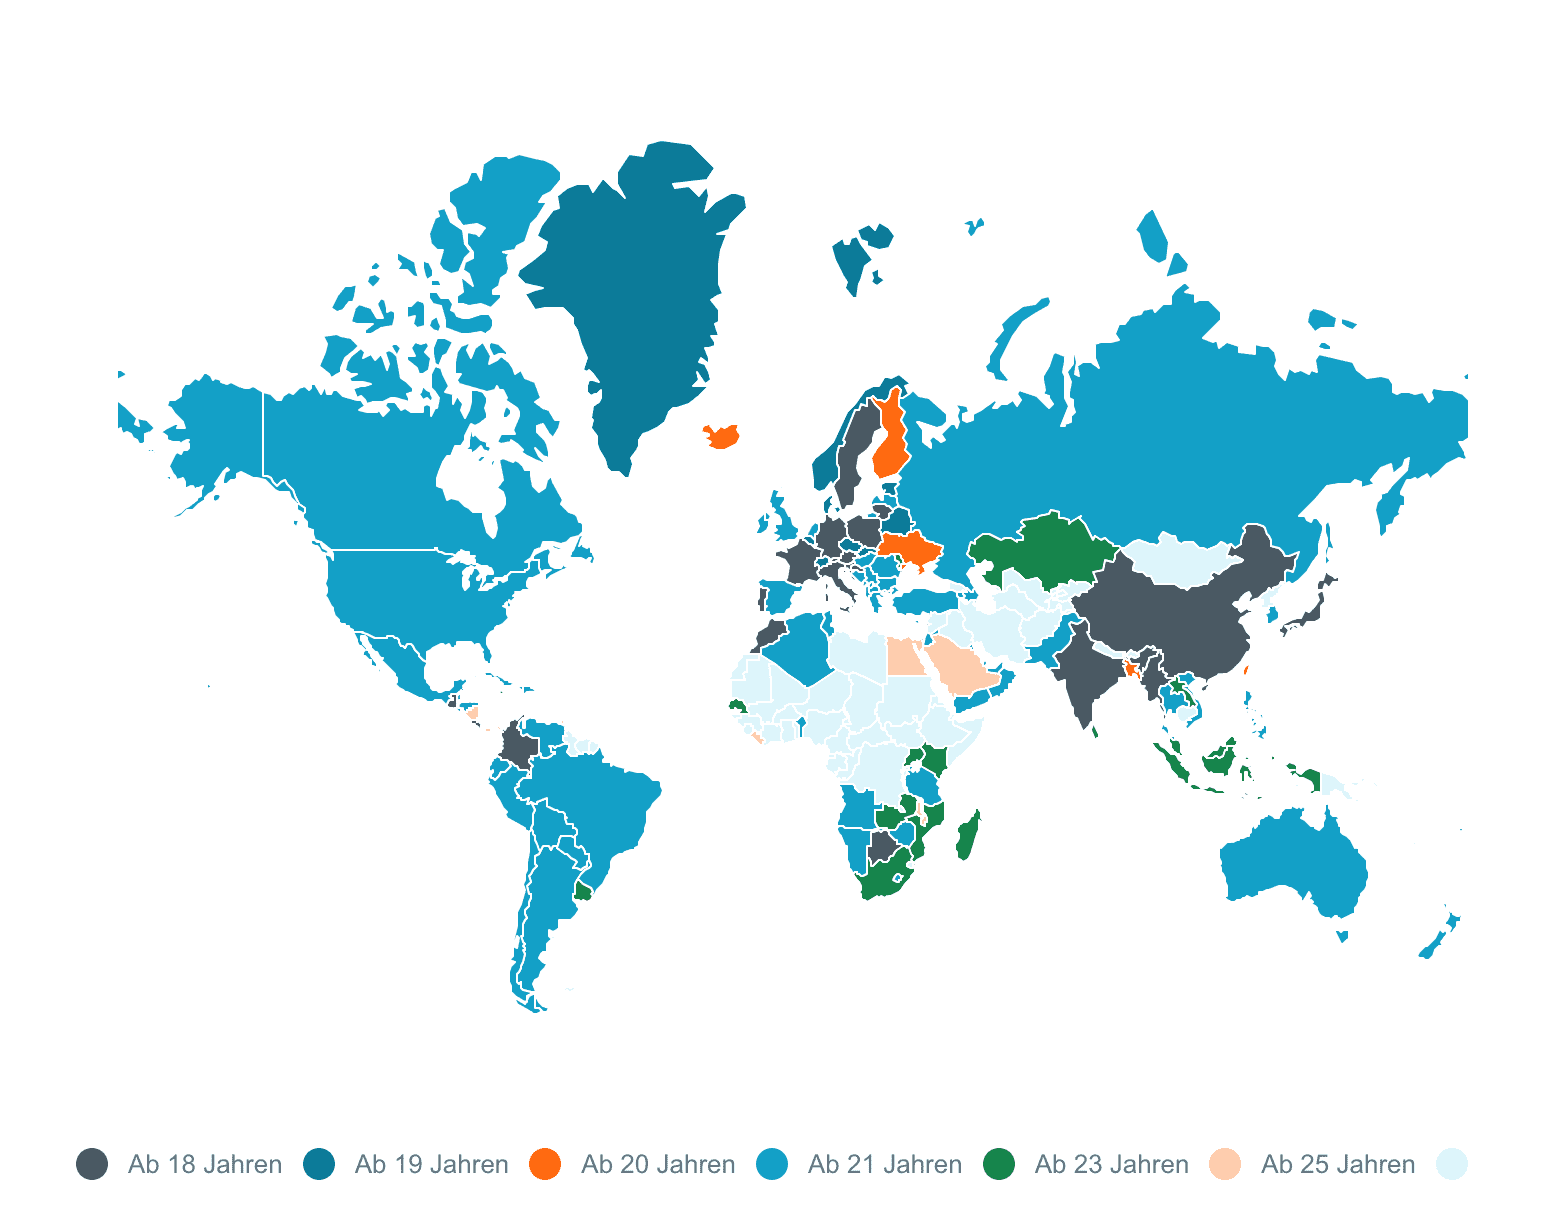 map of the age requirement to rent a car in the world